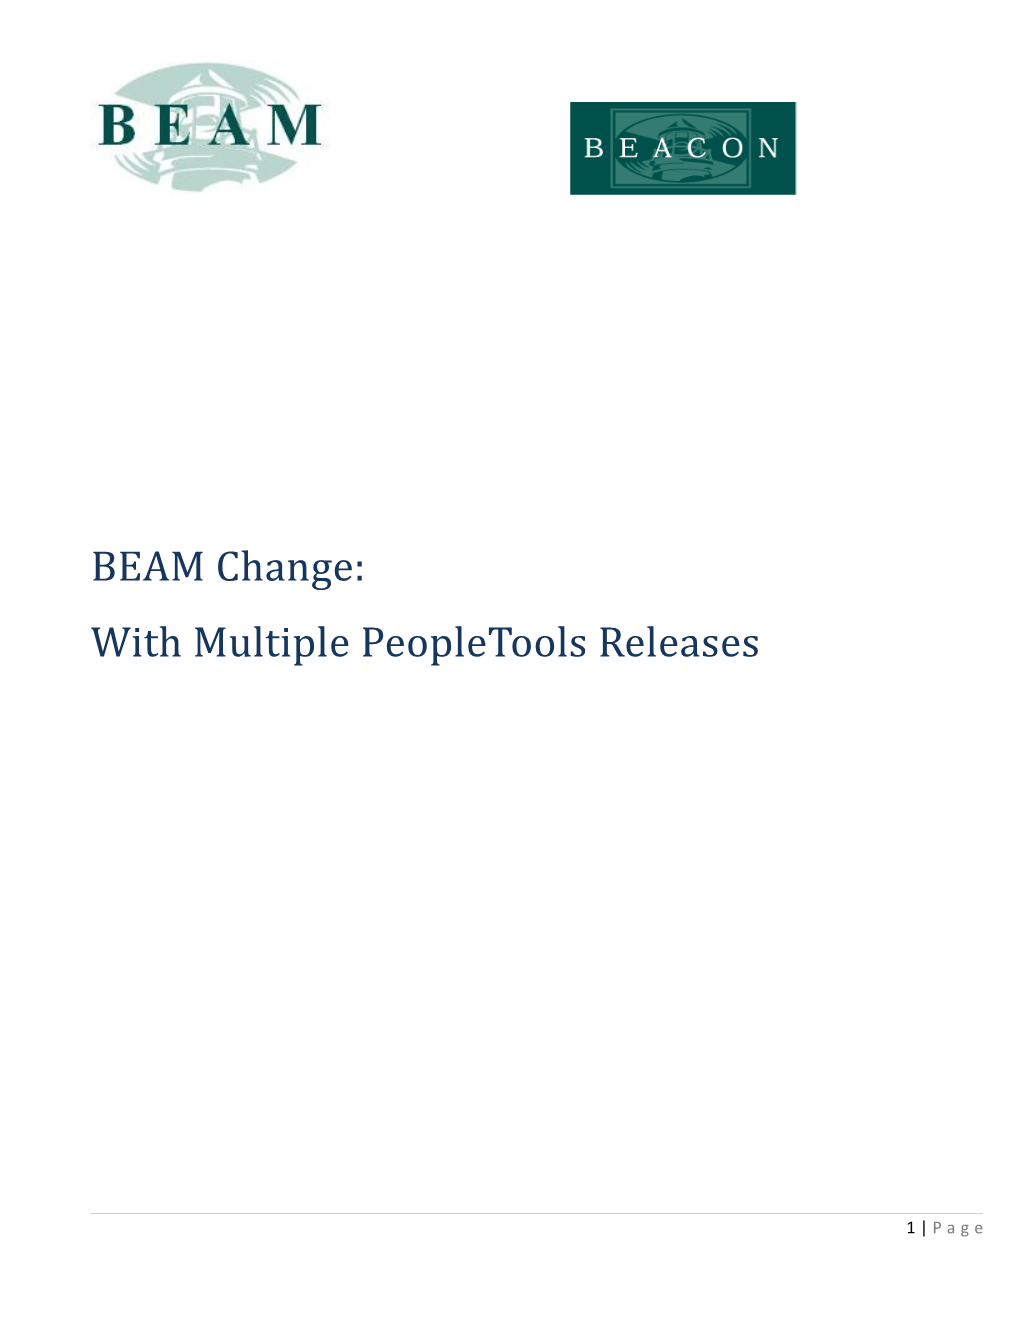 With Multiple Peopletools Releases